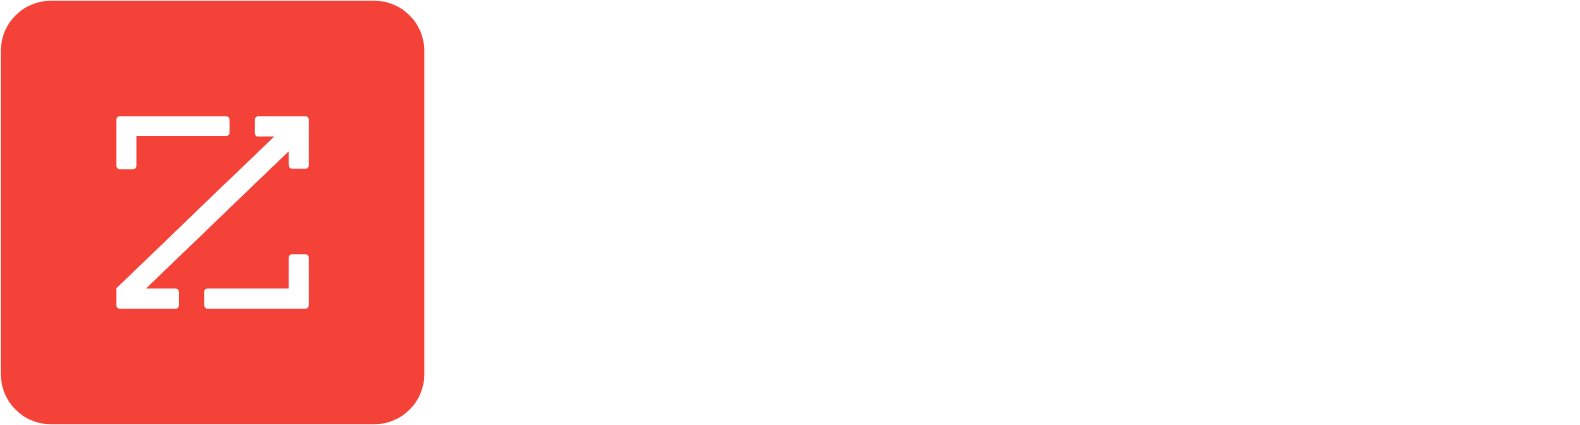 ZoomInfo logo large for dark backgrounds (transparent PNG)